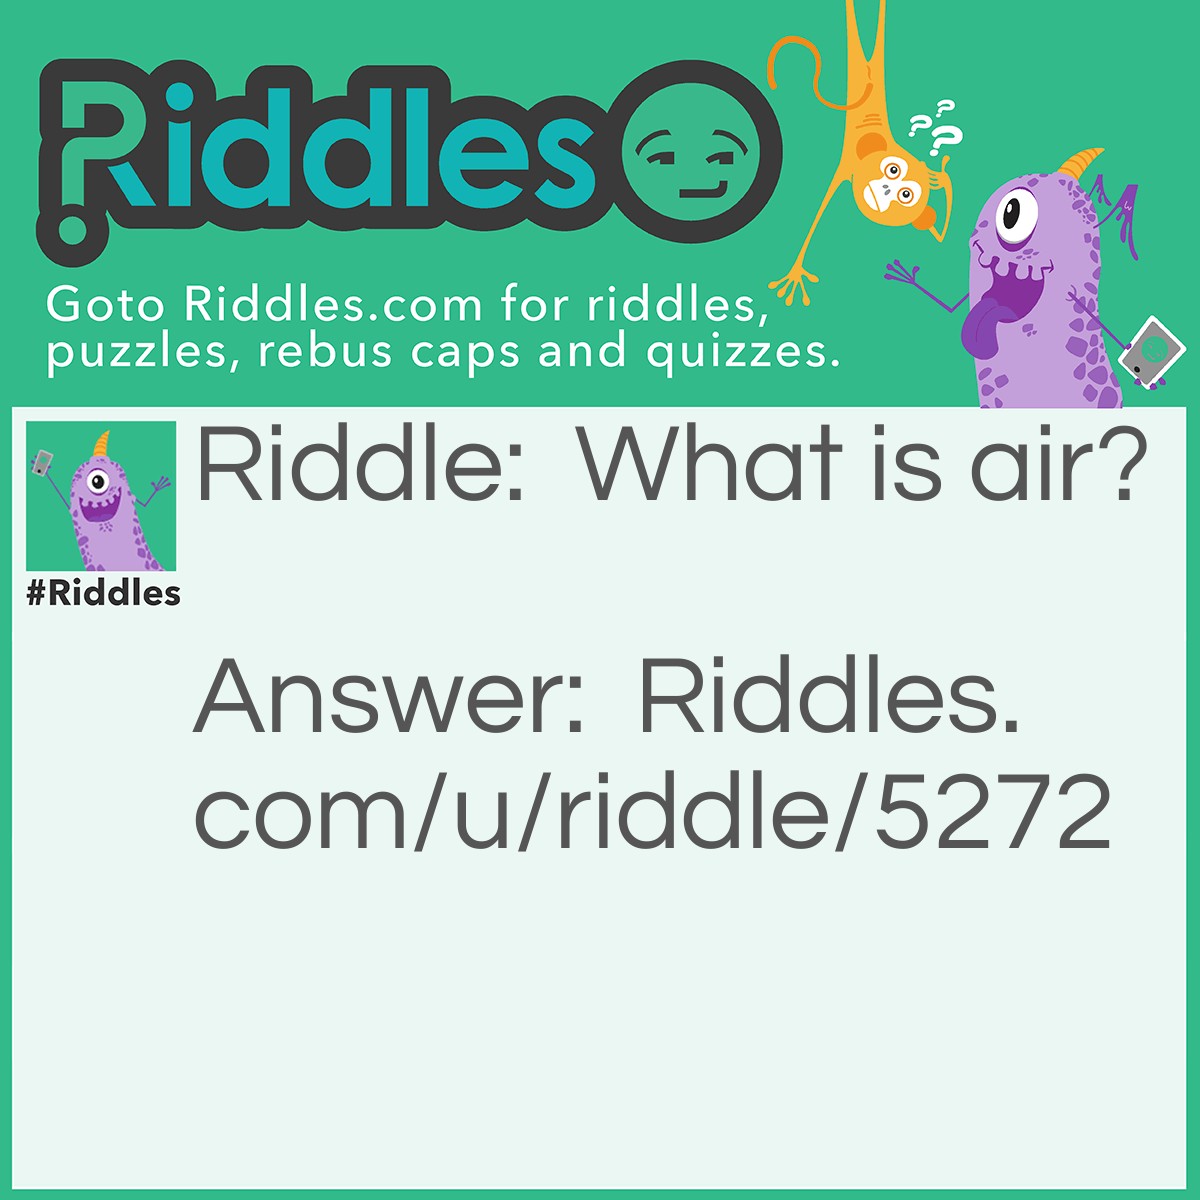 Riddle: What is air? Answer: It is a type of air.